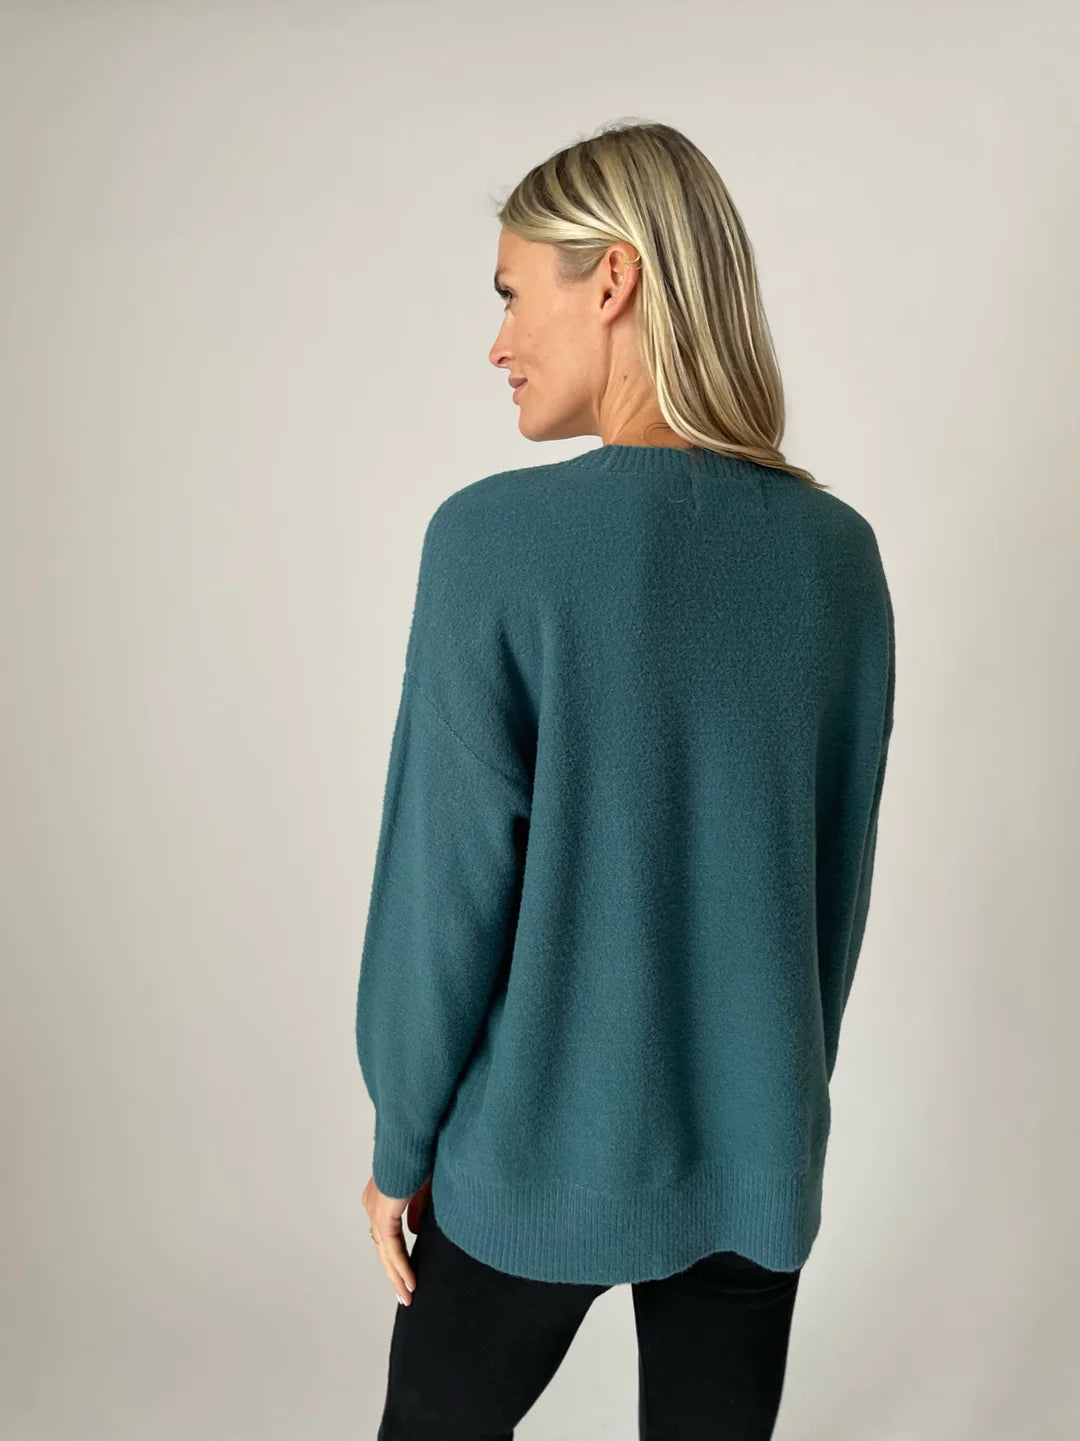 Six Fifty Super Soft Realm Sweater